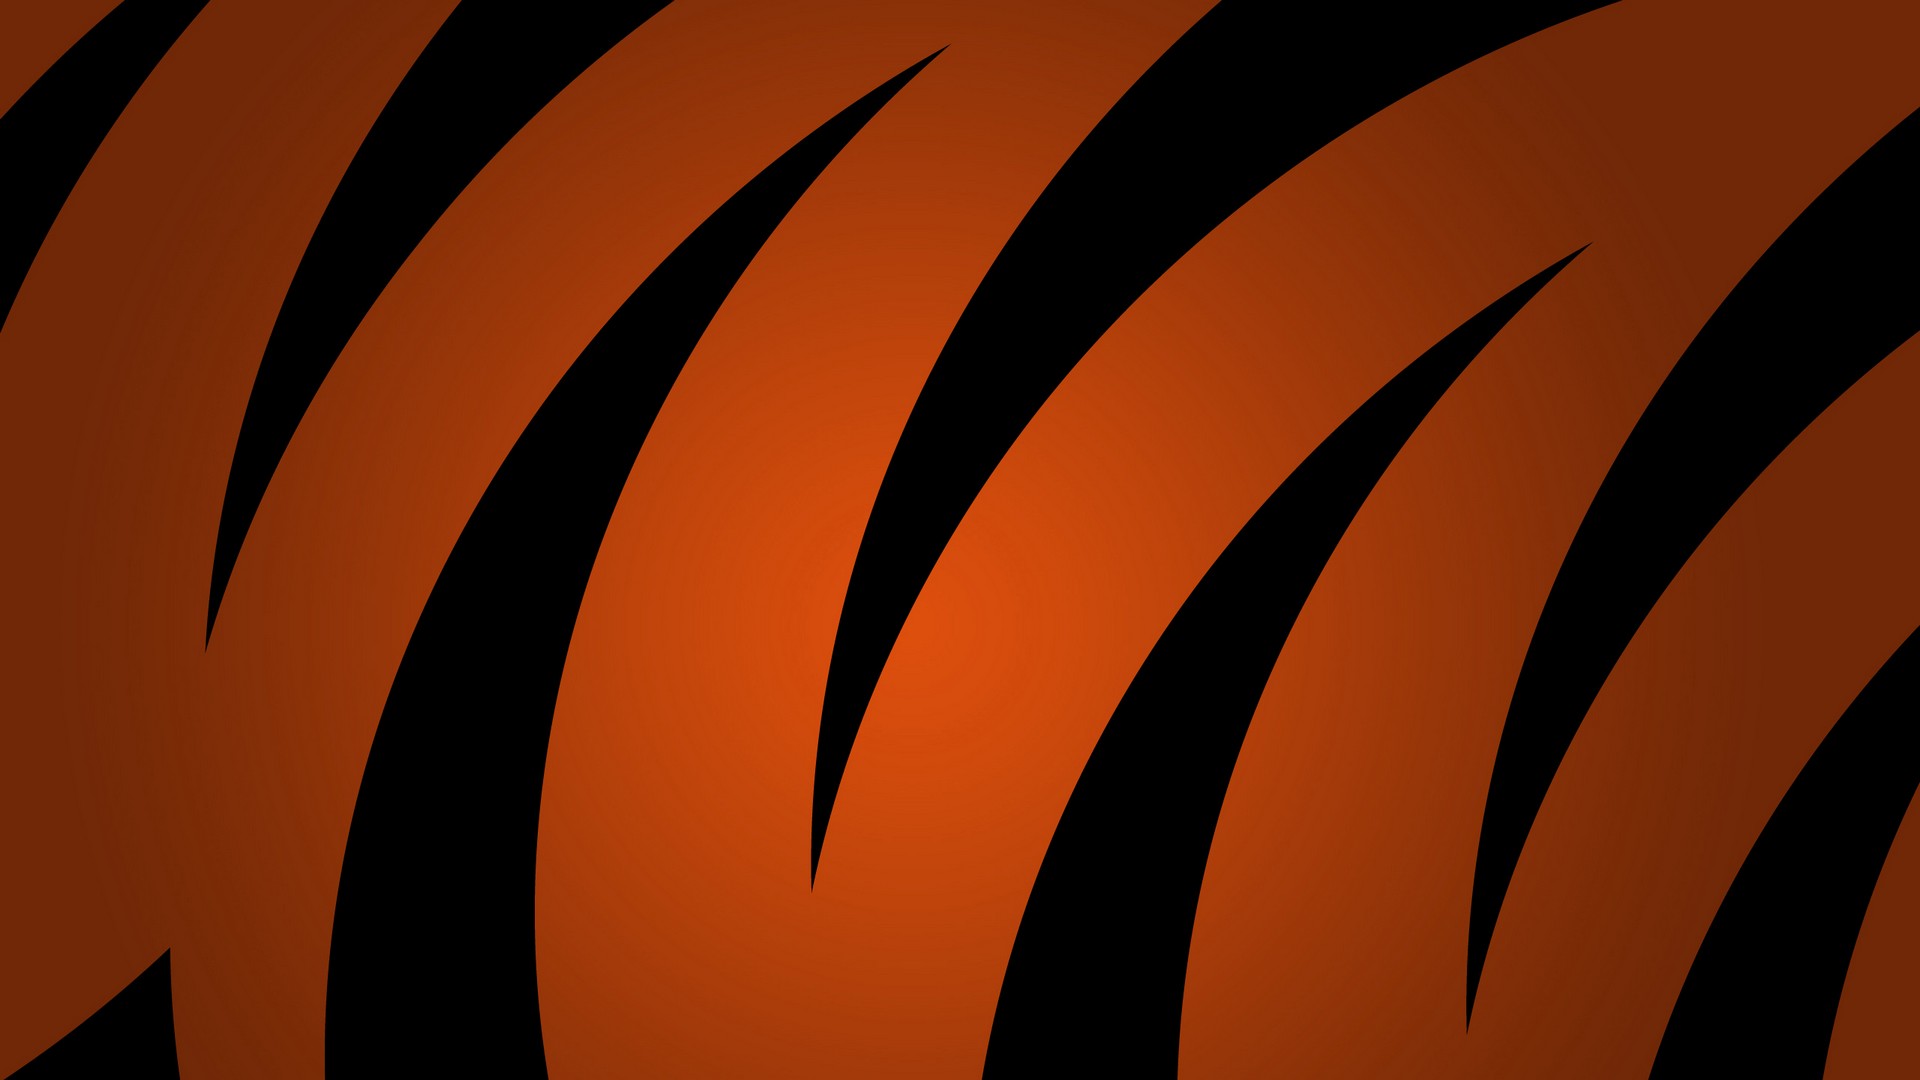 Cincinnati Bengals NFL For Mac Wallpaper With high-resolution 1920X1080 pixel. You can use this wallpaper for your Mac or Windows Desktop Background, iPhone, Android or Tablet and another Smartphone device